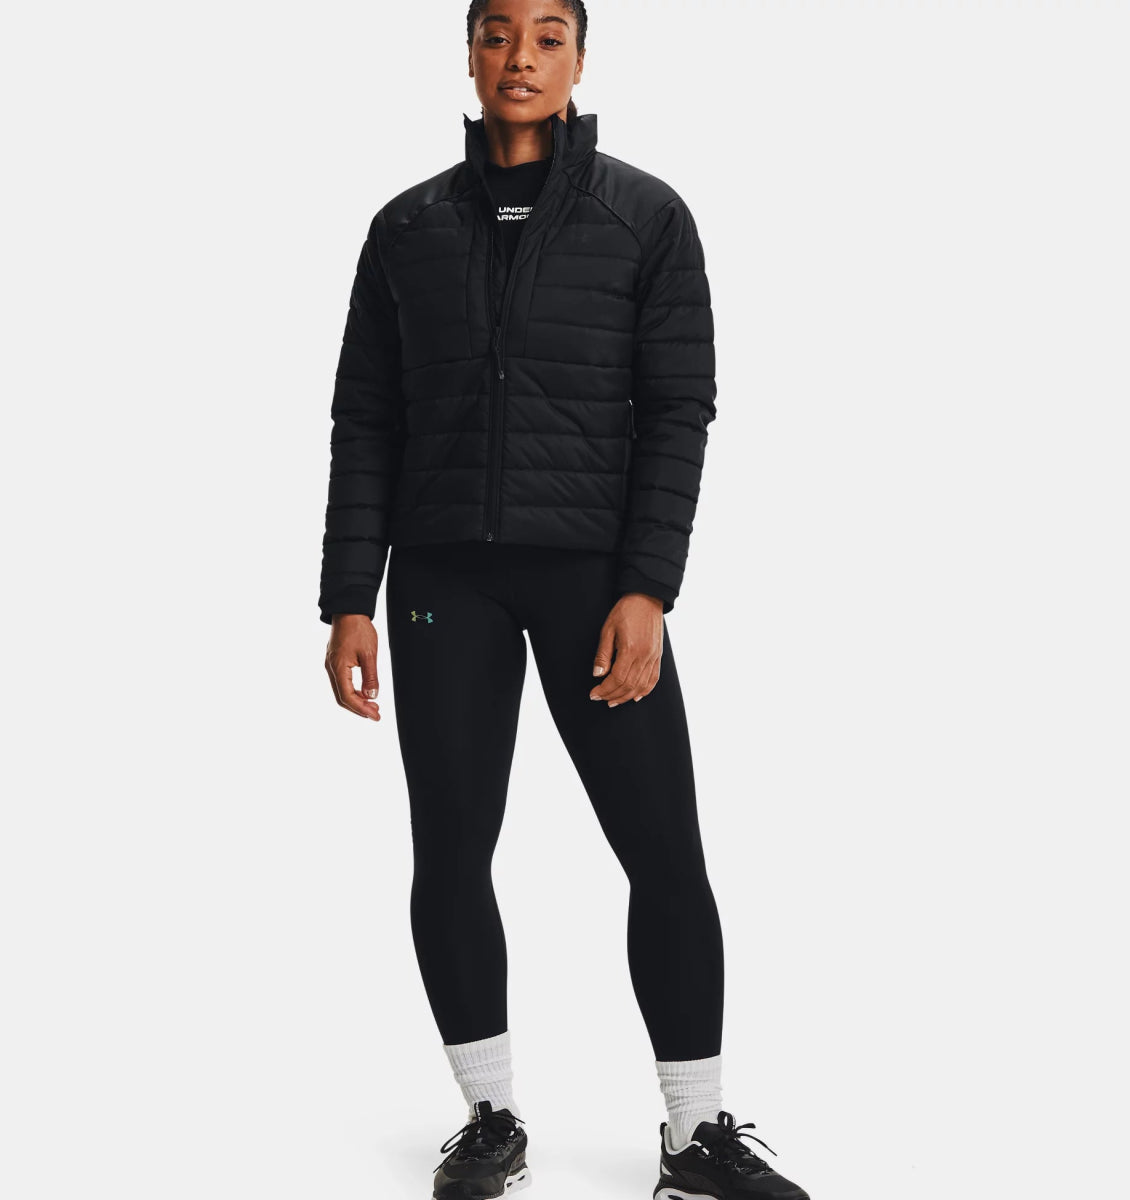 UA Storm Insulated Jacket - The Shoe CollectiveUnder Armour